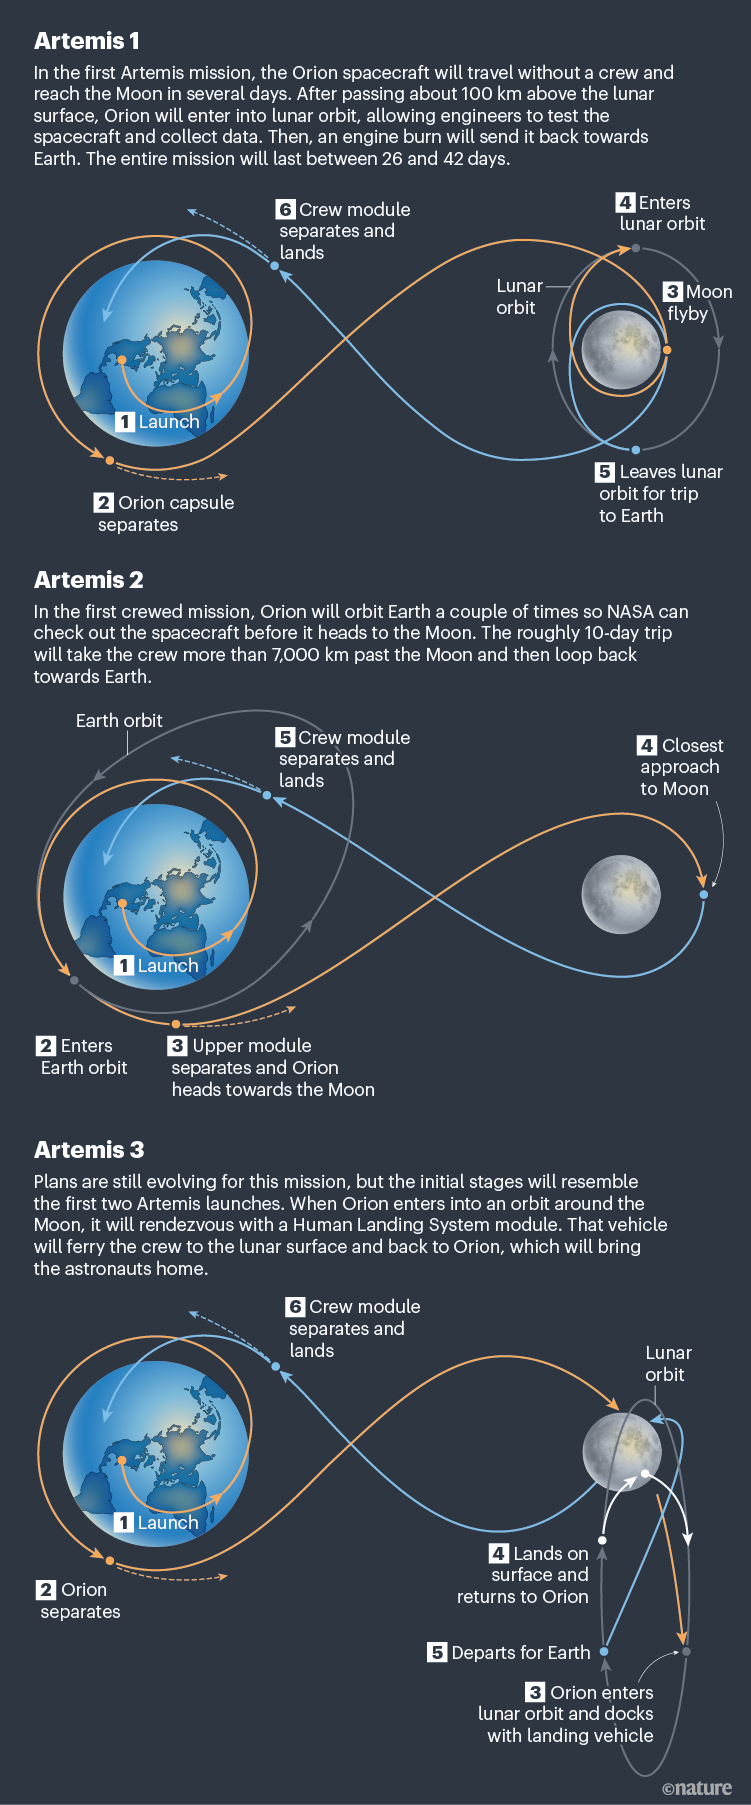 Three diagrams showing the details of the three Artemis missions.